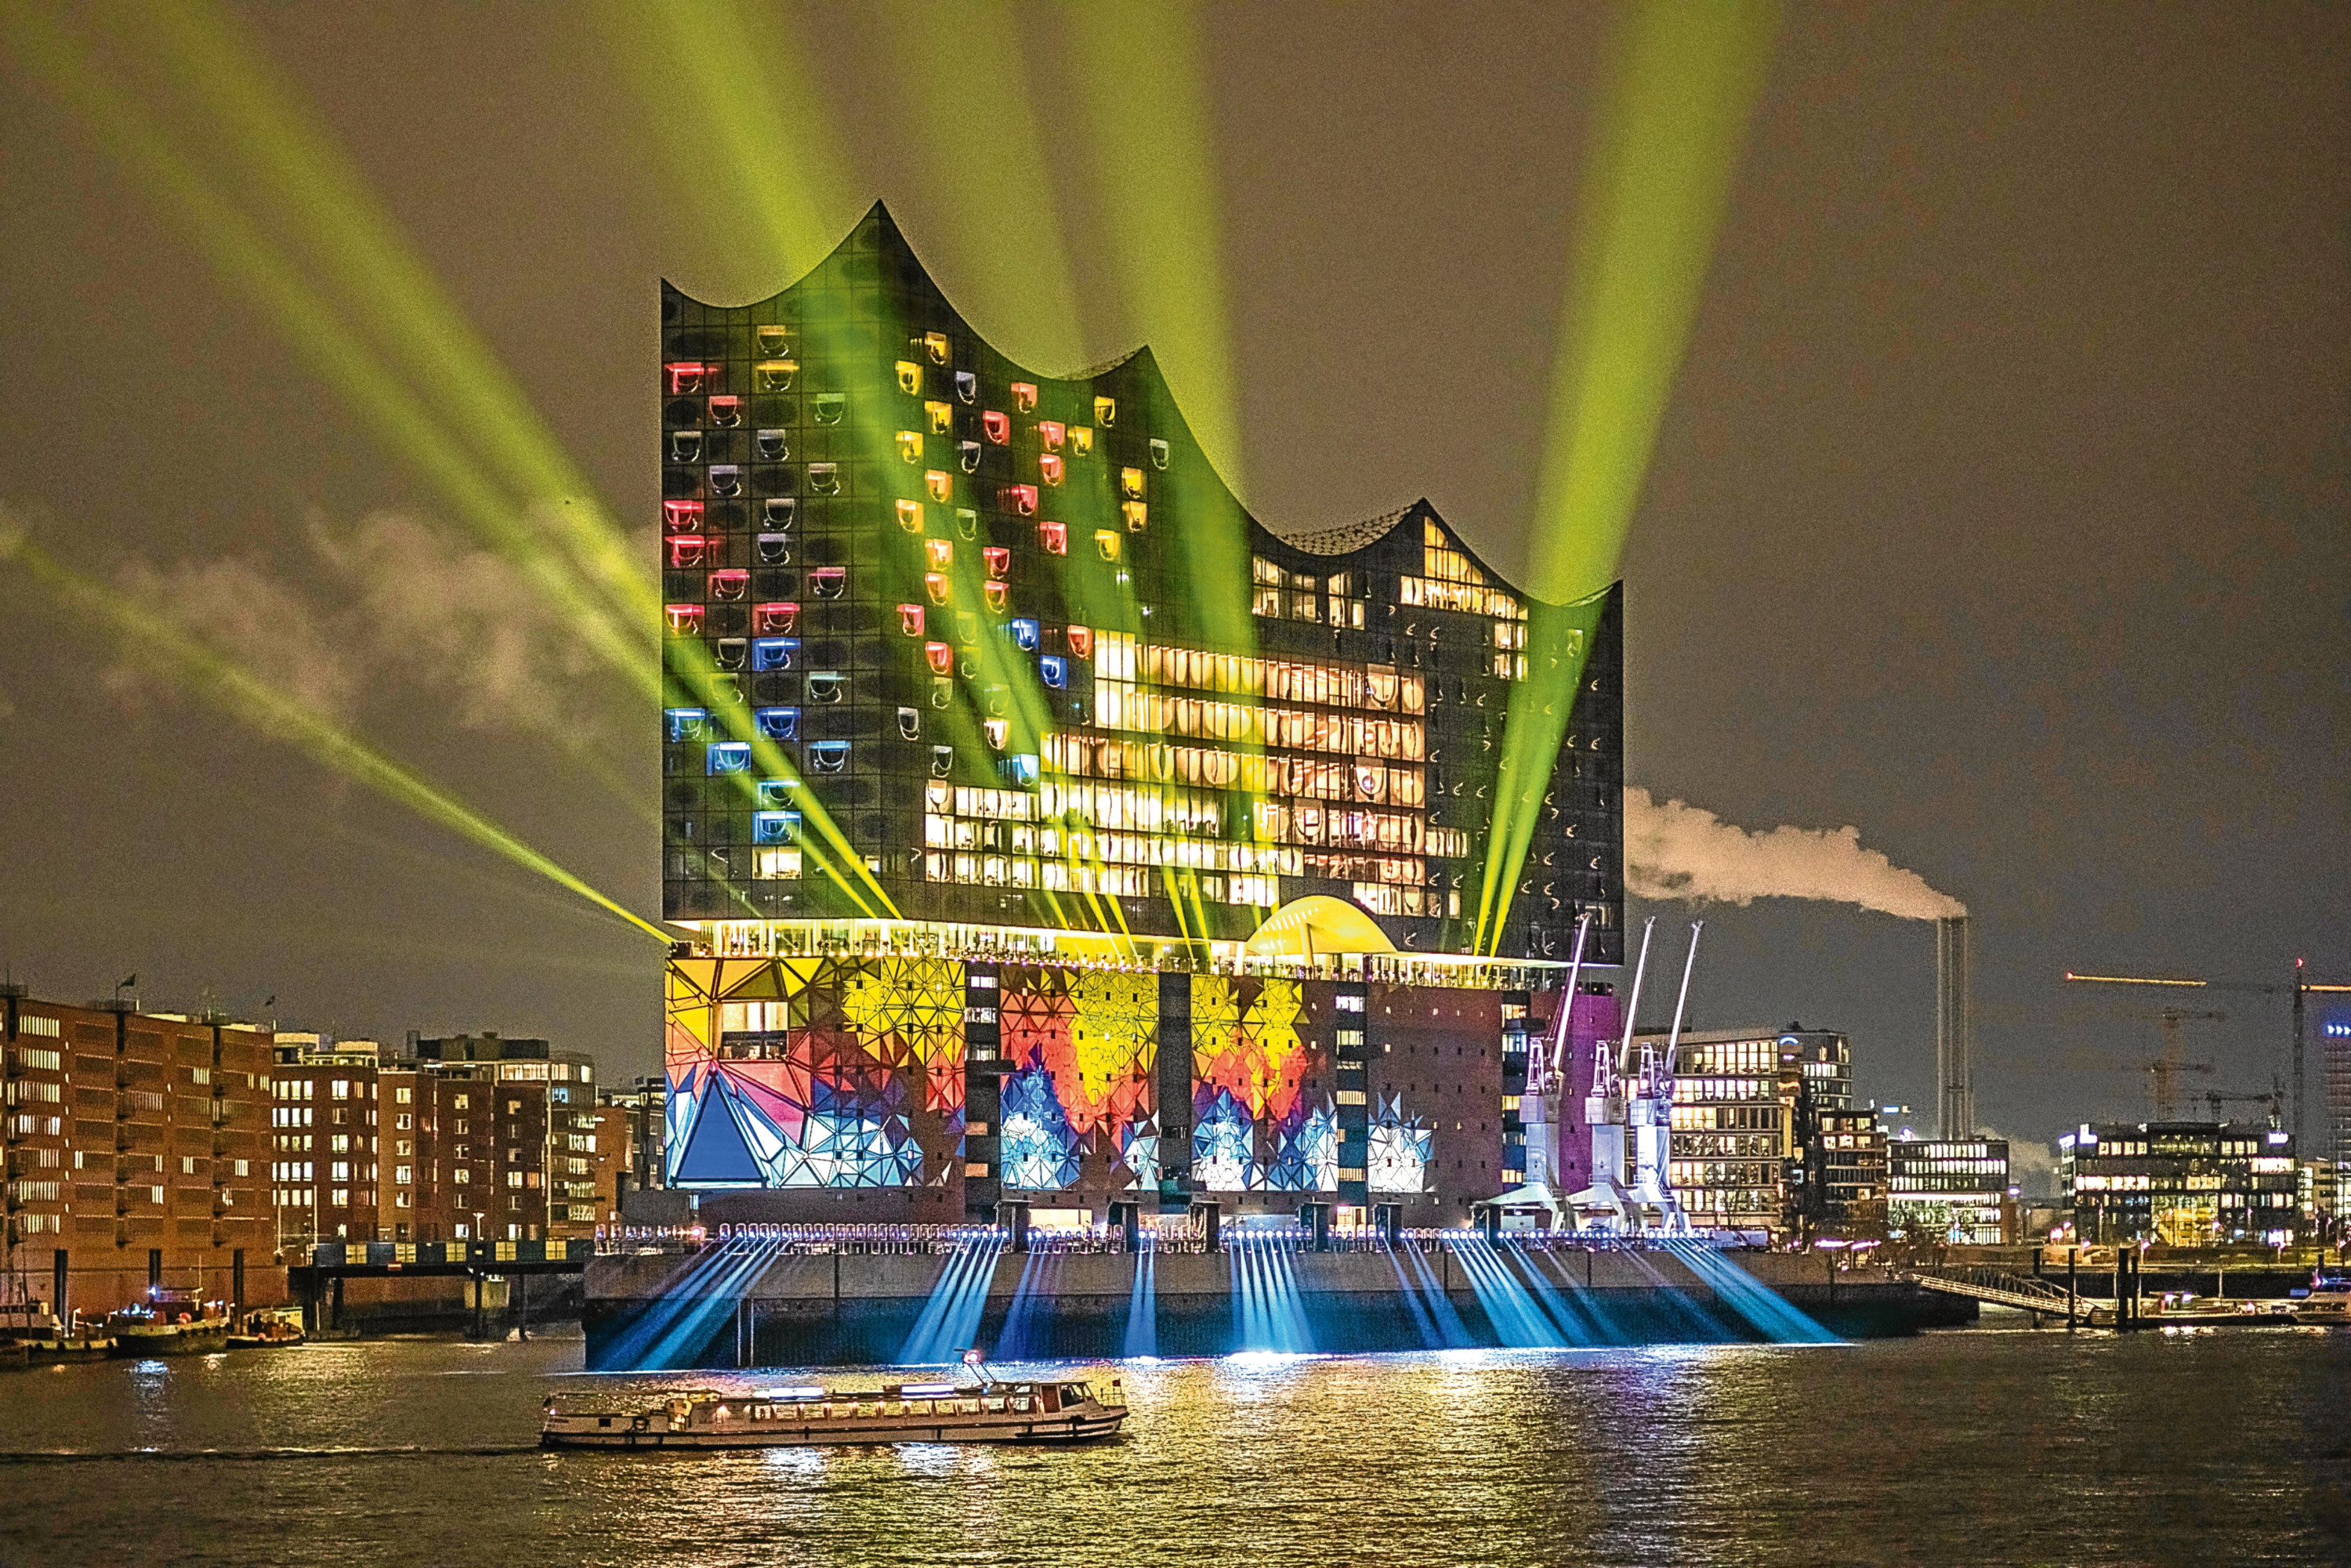 The Elbphilharmonie in Hamburg lit up for opening night in January.